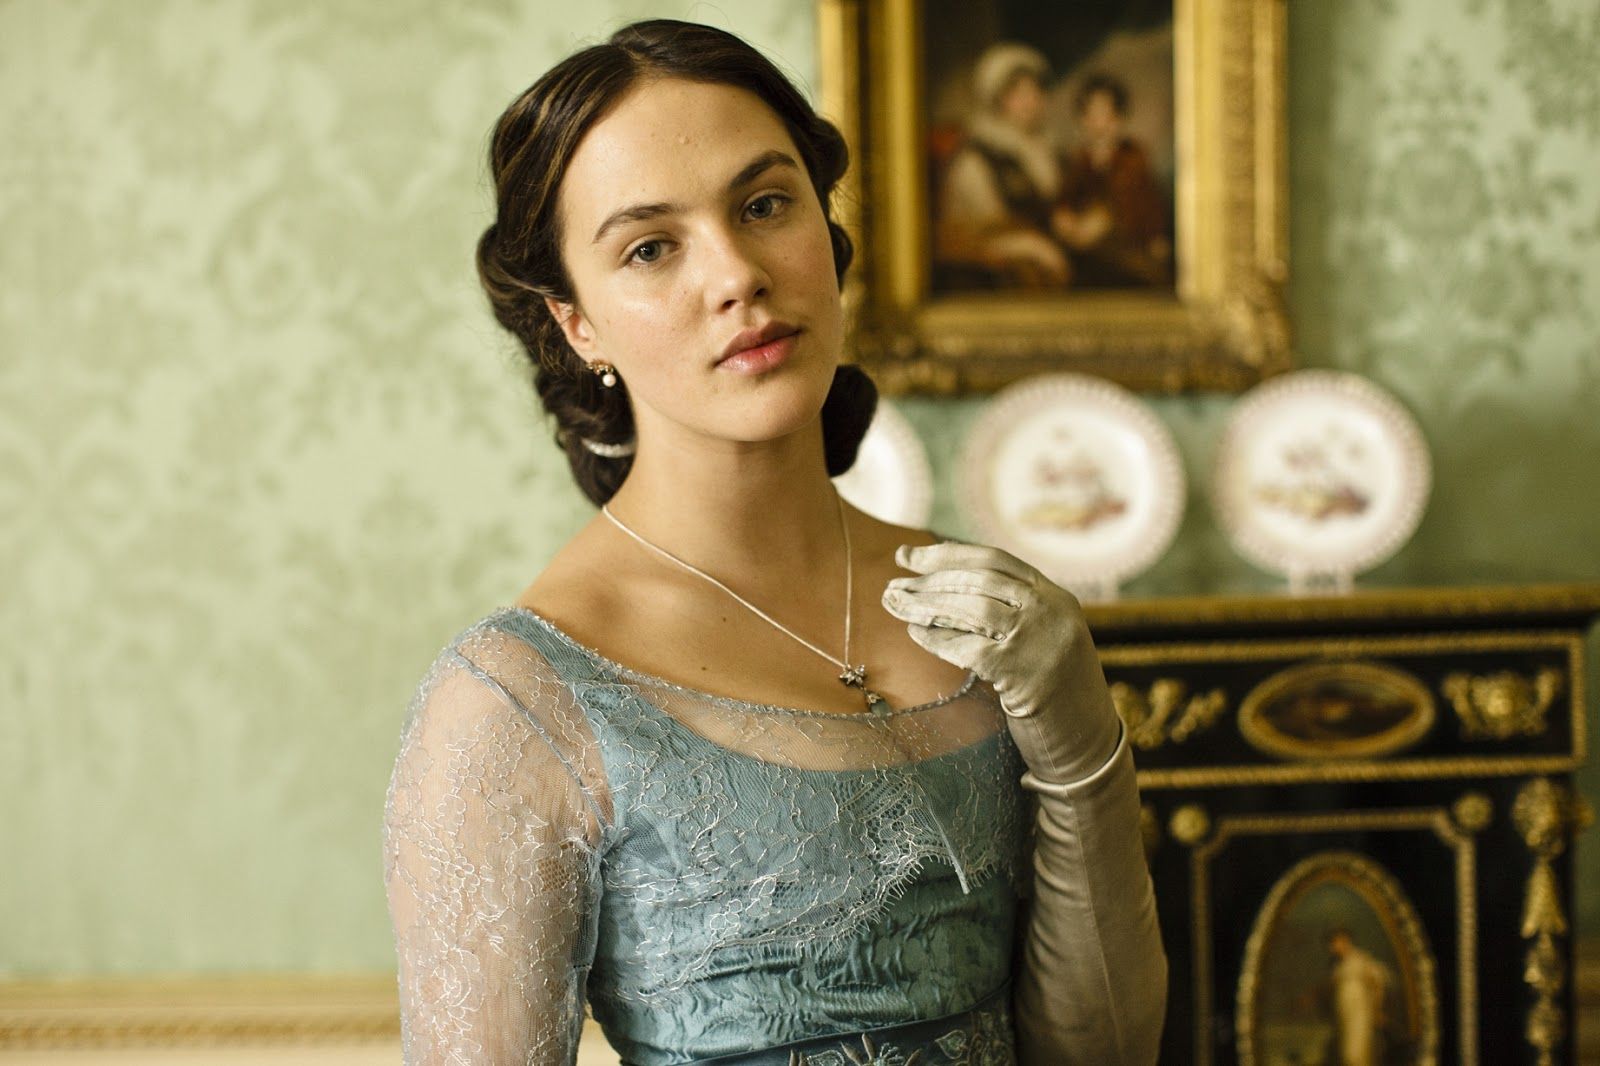 Jessica Brown Findlay, who played Lady Sybil, almost wasn't an actress